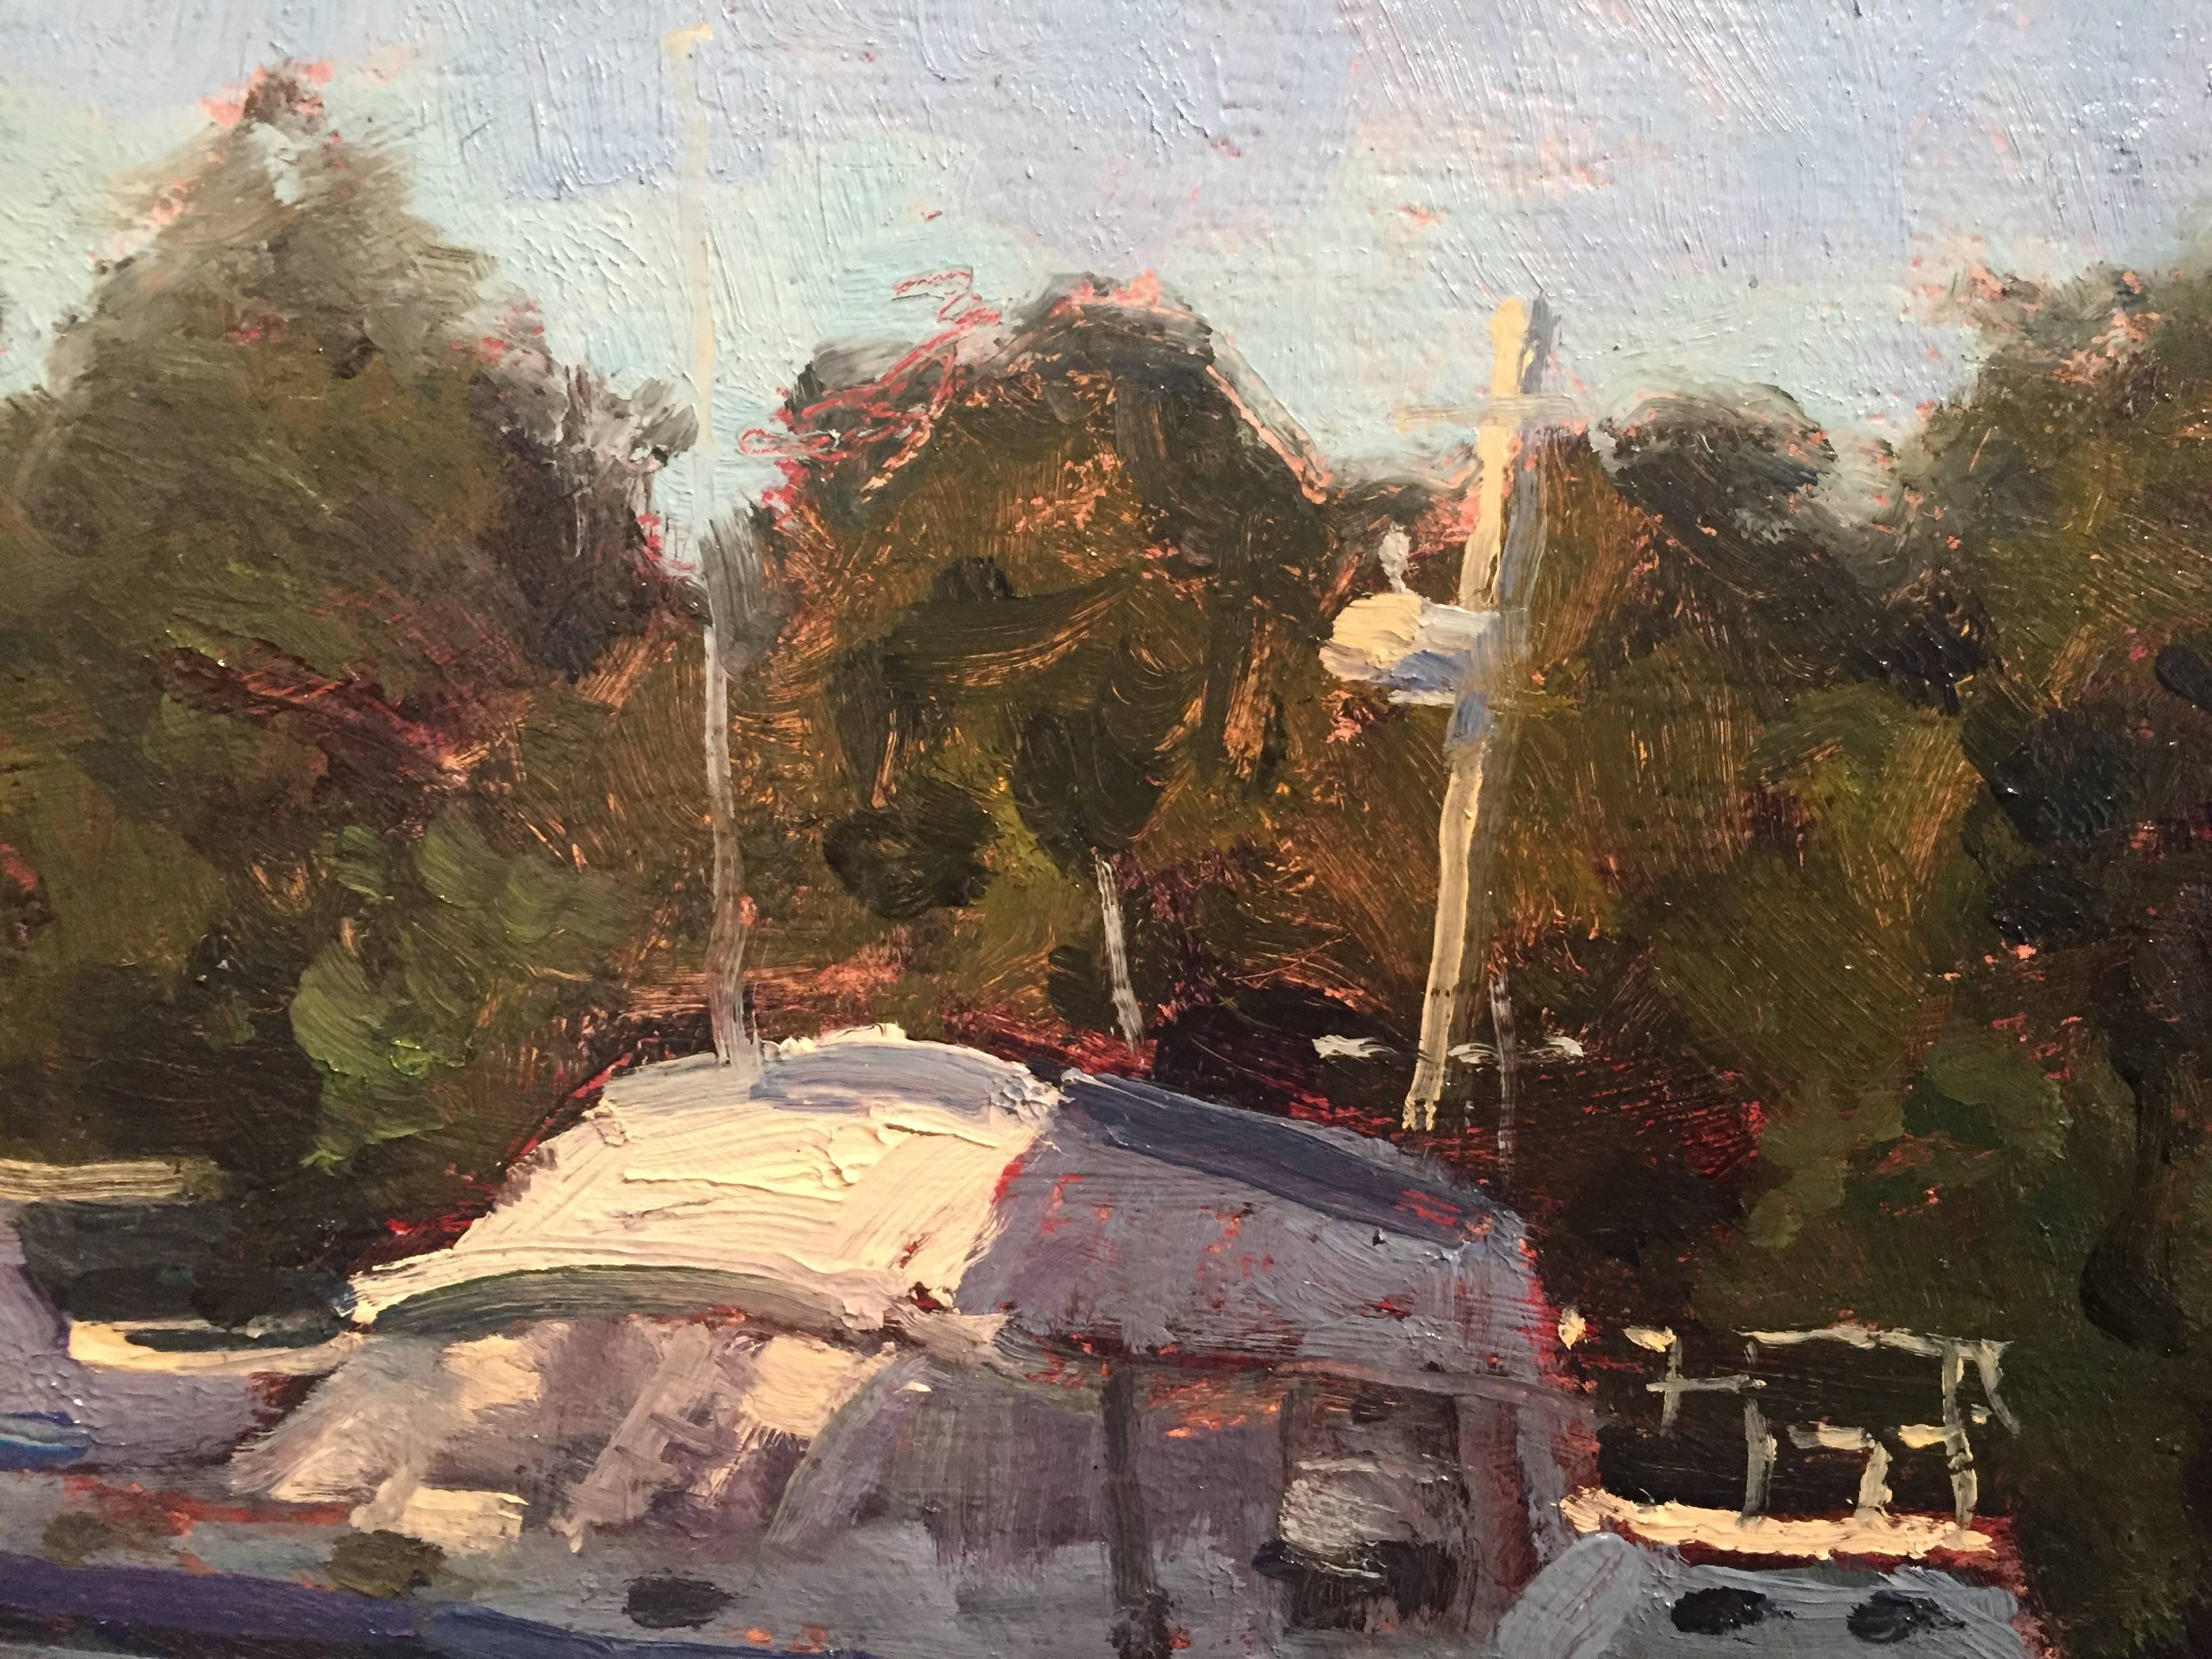 Painted en plein air in Florida, a mid-size fishing boat rests in a tree-lined harbor. Rocks and dirt are portrayed in hues of purple, brown and yellow in the foreground. A white heron stands perched at the edge of the water, which is reflecting the